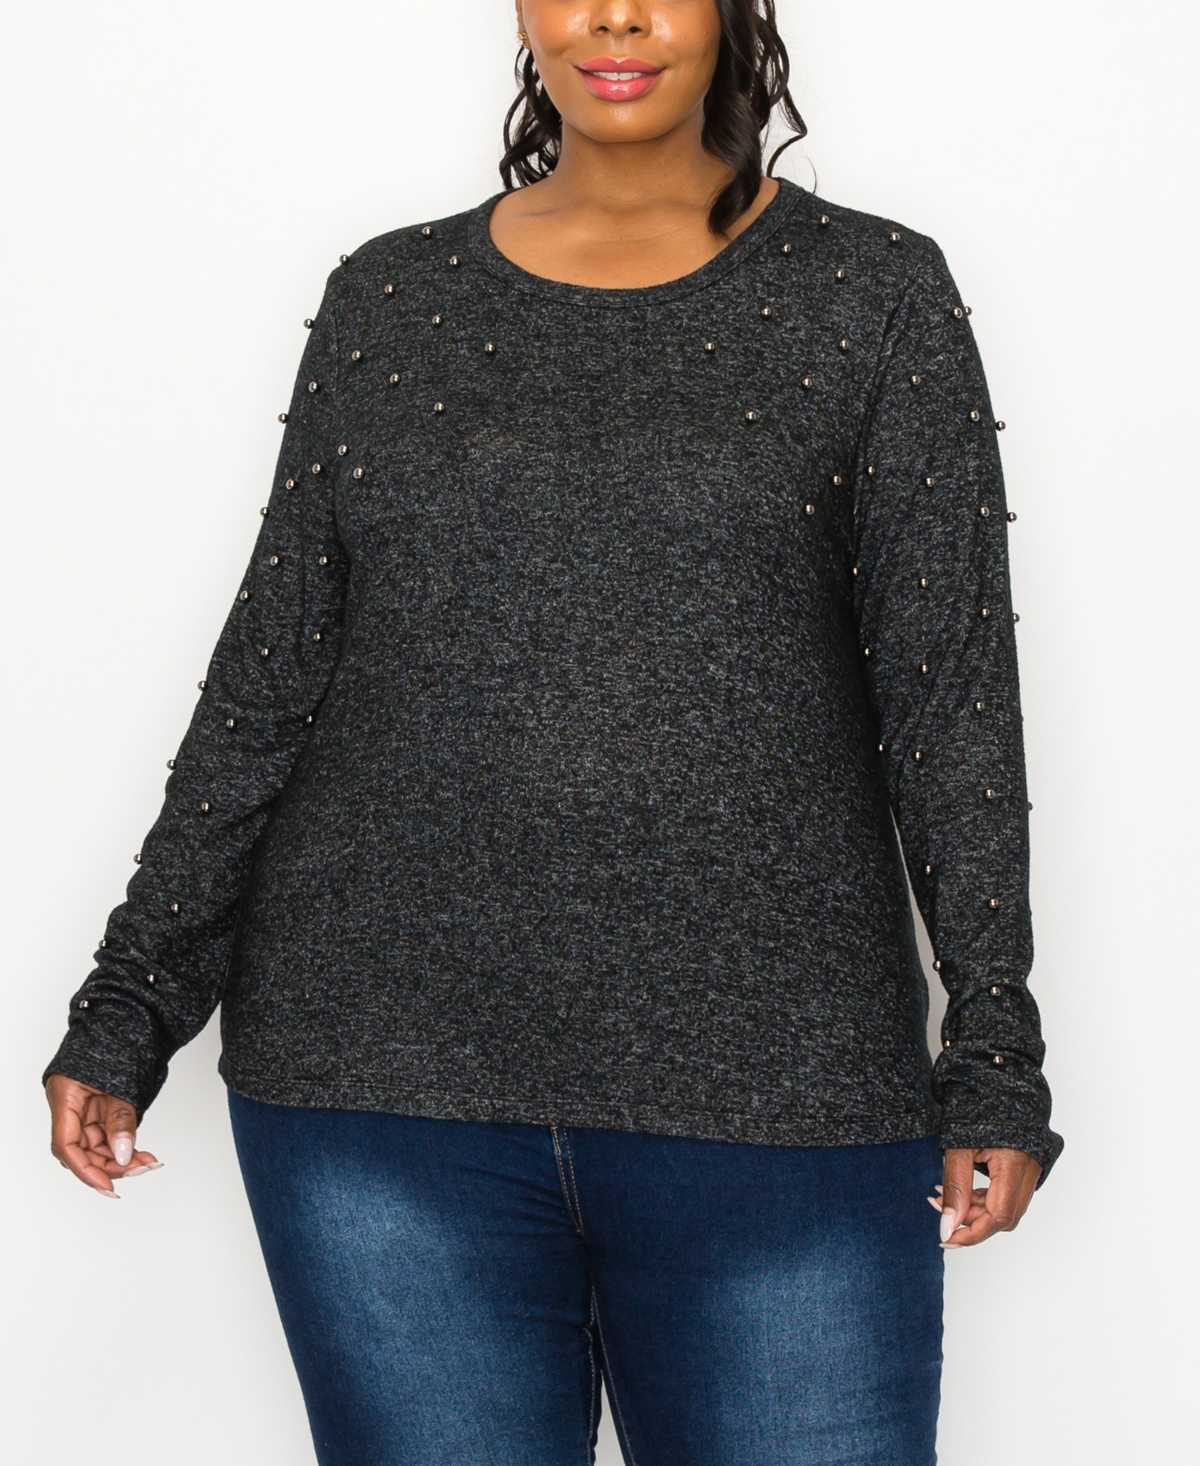 Coin 1804 Plus Size Cozy Long Sleeve Pullover Top With Gunmetal Studs In Charcoal